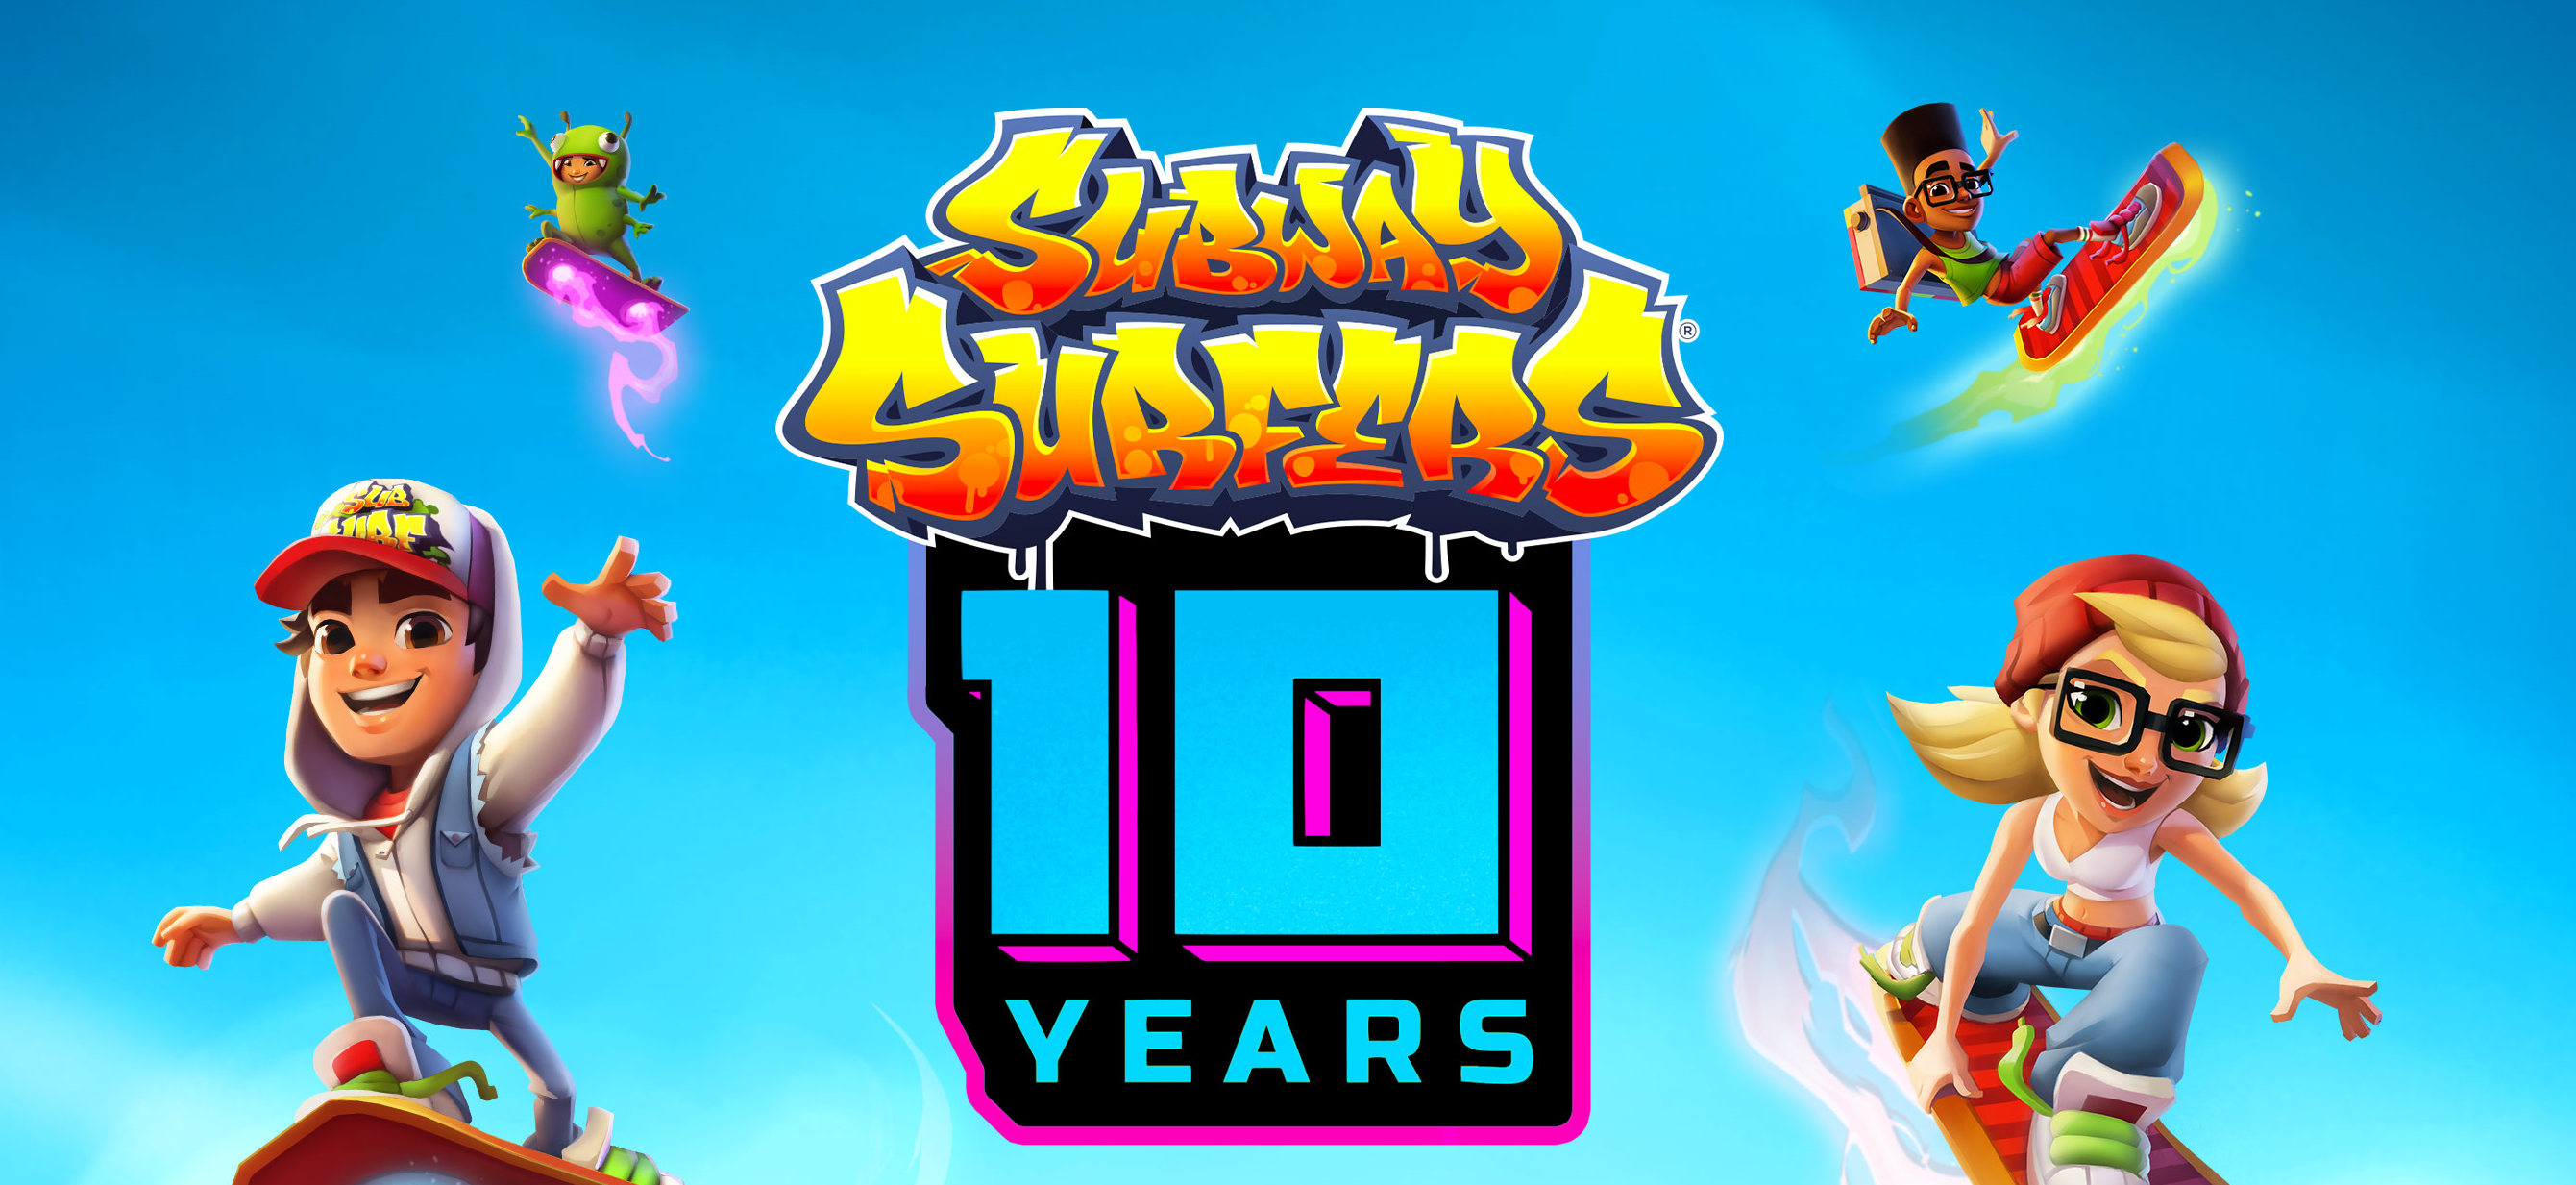 Image for Subway Surfers surpasses 4bn downloads | News-in-brief